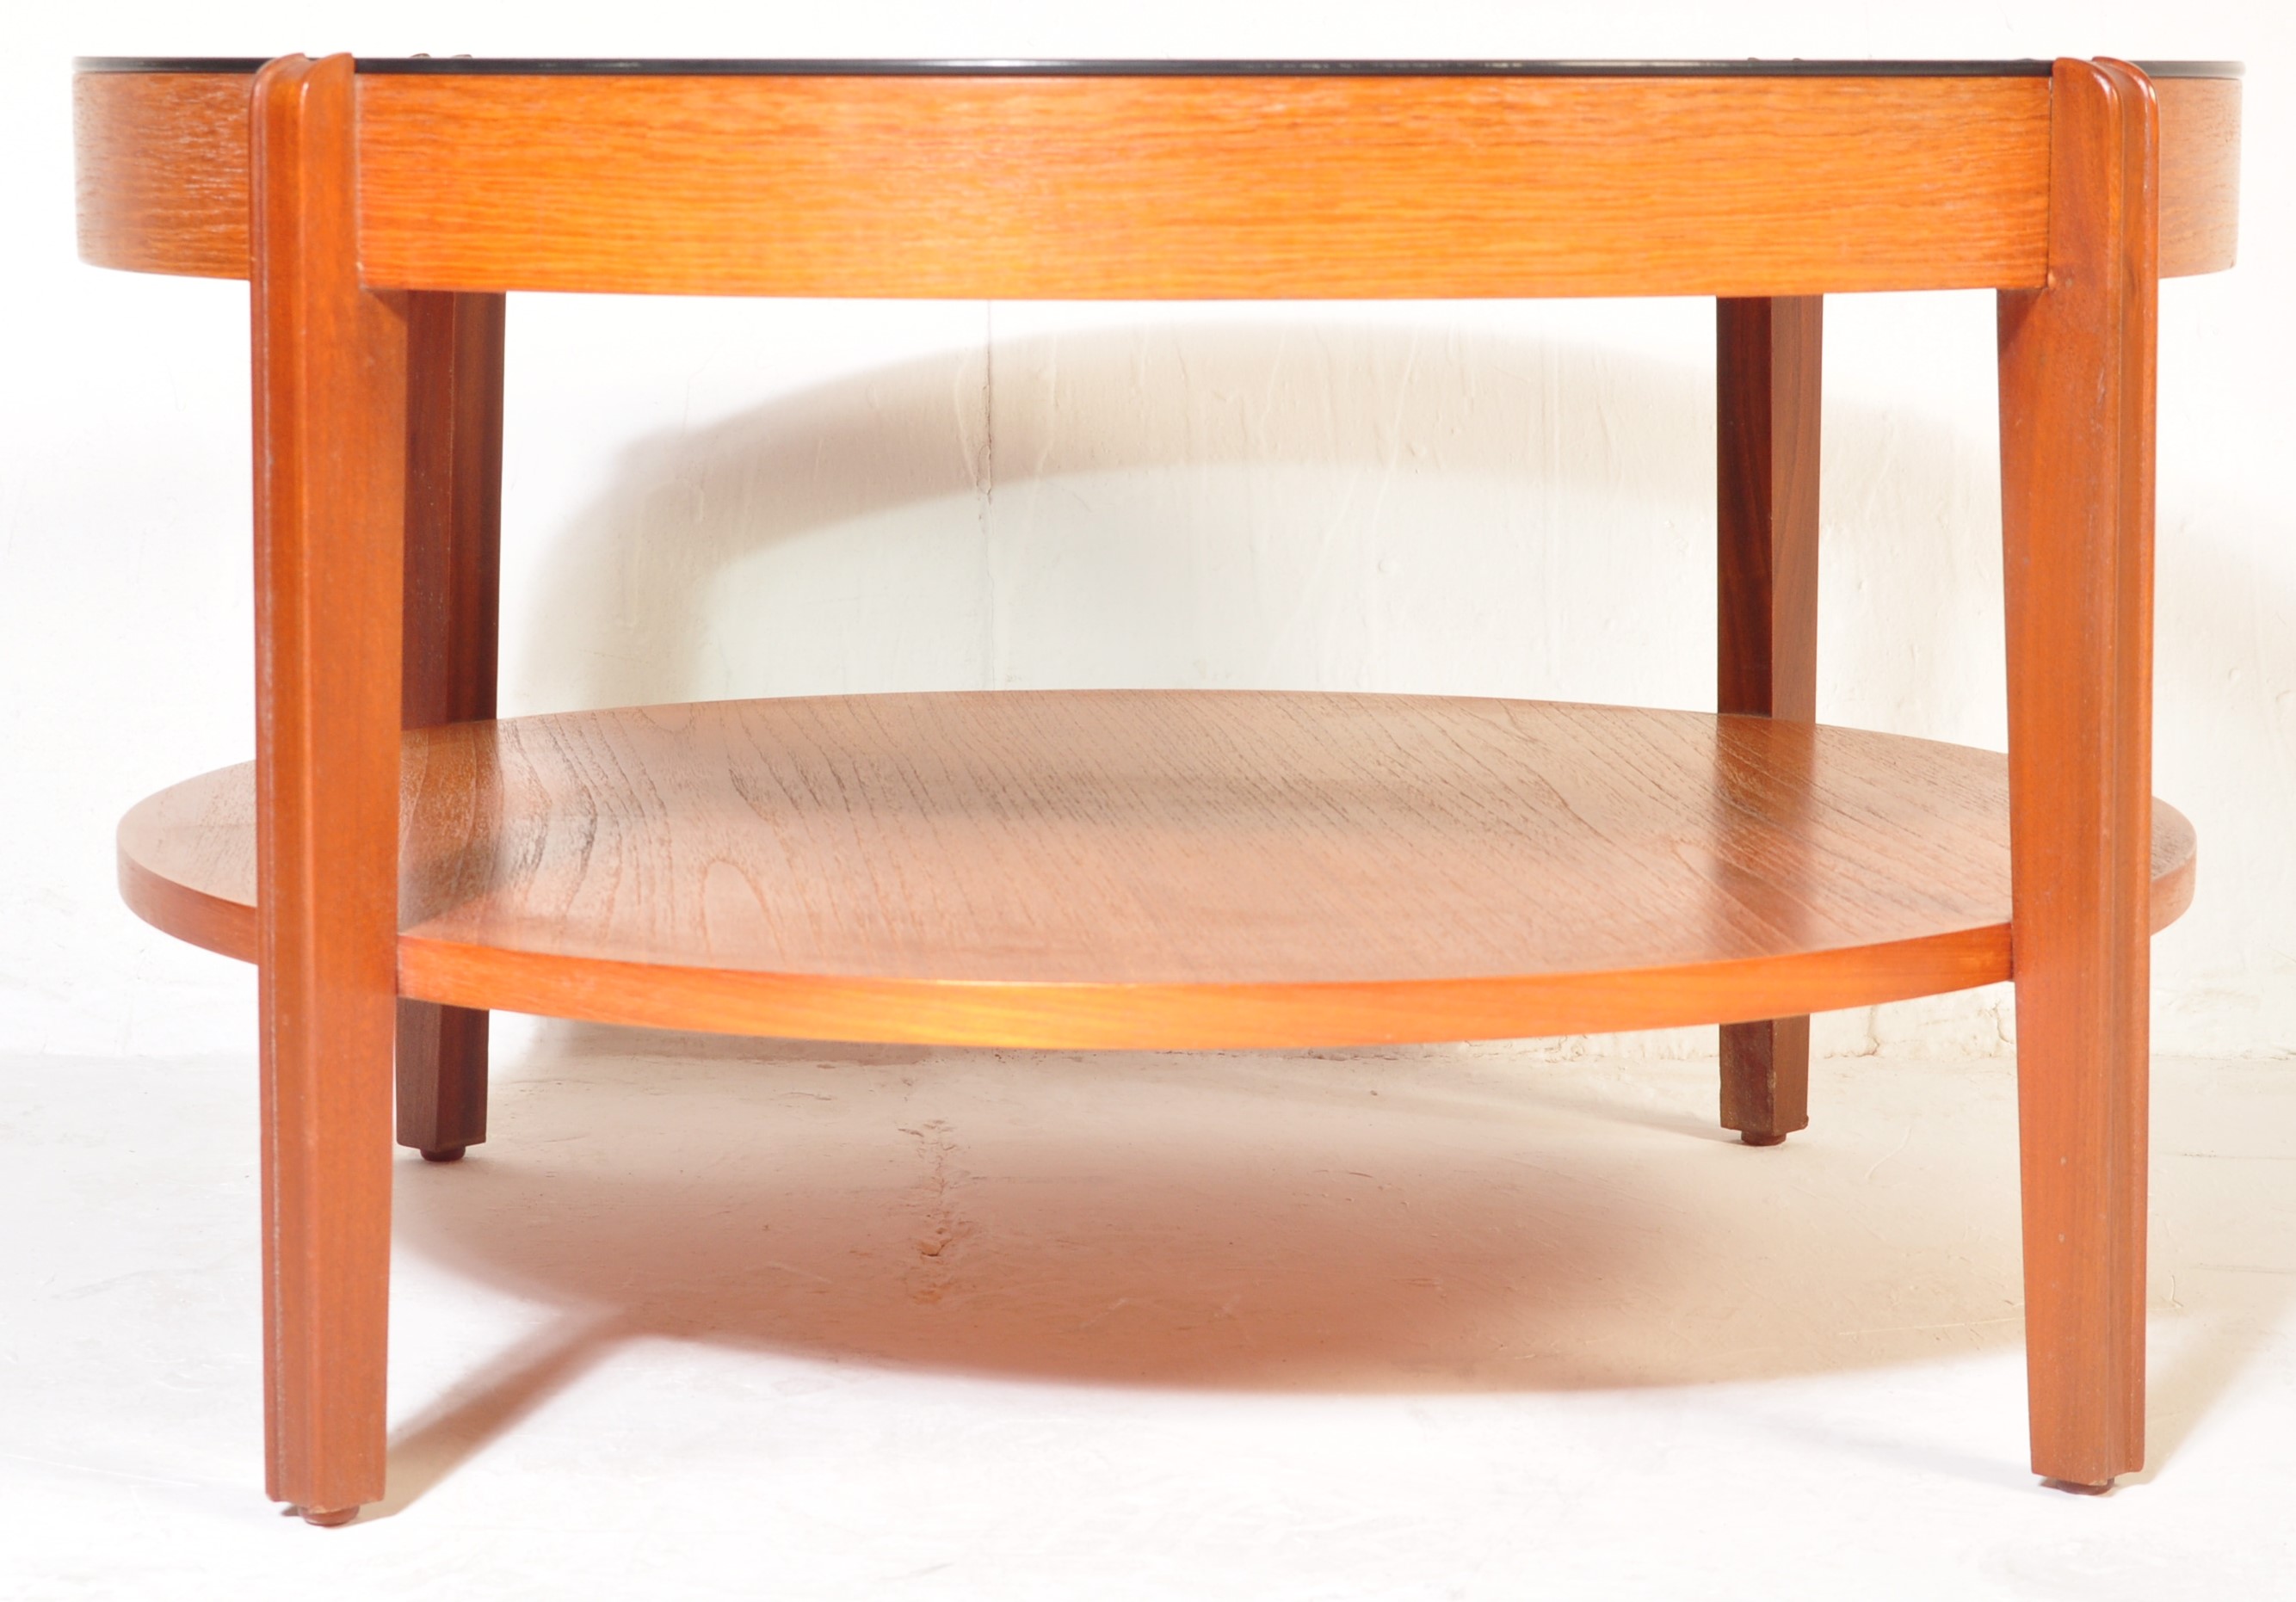 RETRO VINTAGE MID 20TH CENTURY REMPLOY COFFEE TABLE - Image 2 of 4